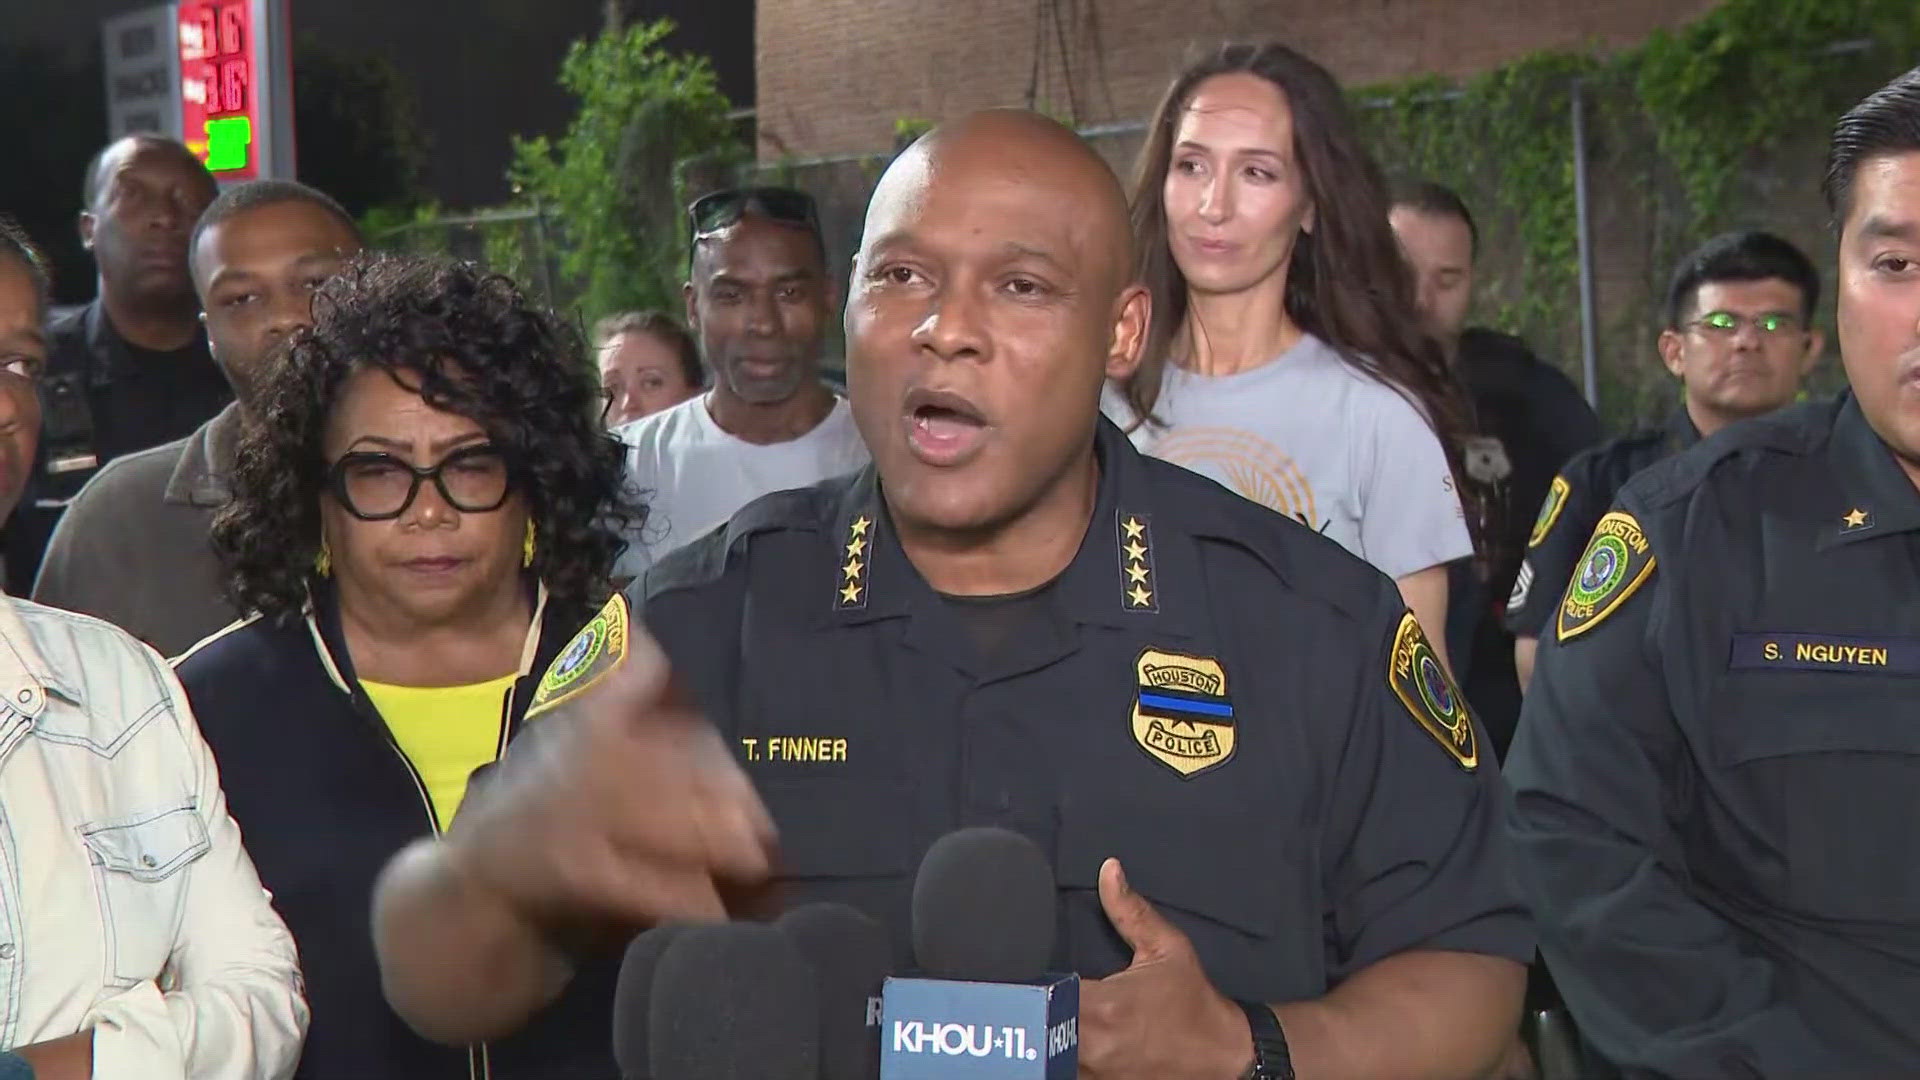 Police hope increased patrols will help curb crime in Houston's Third Ward.